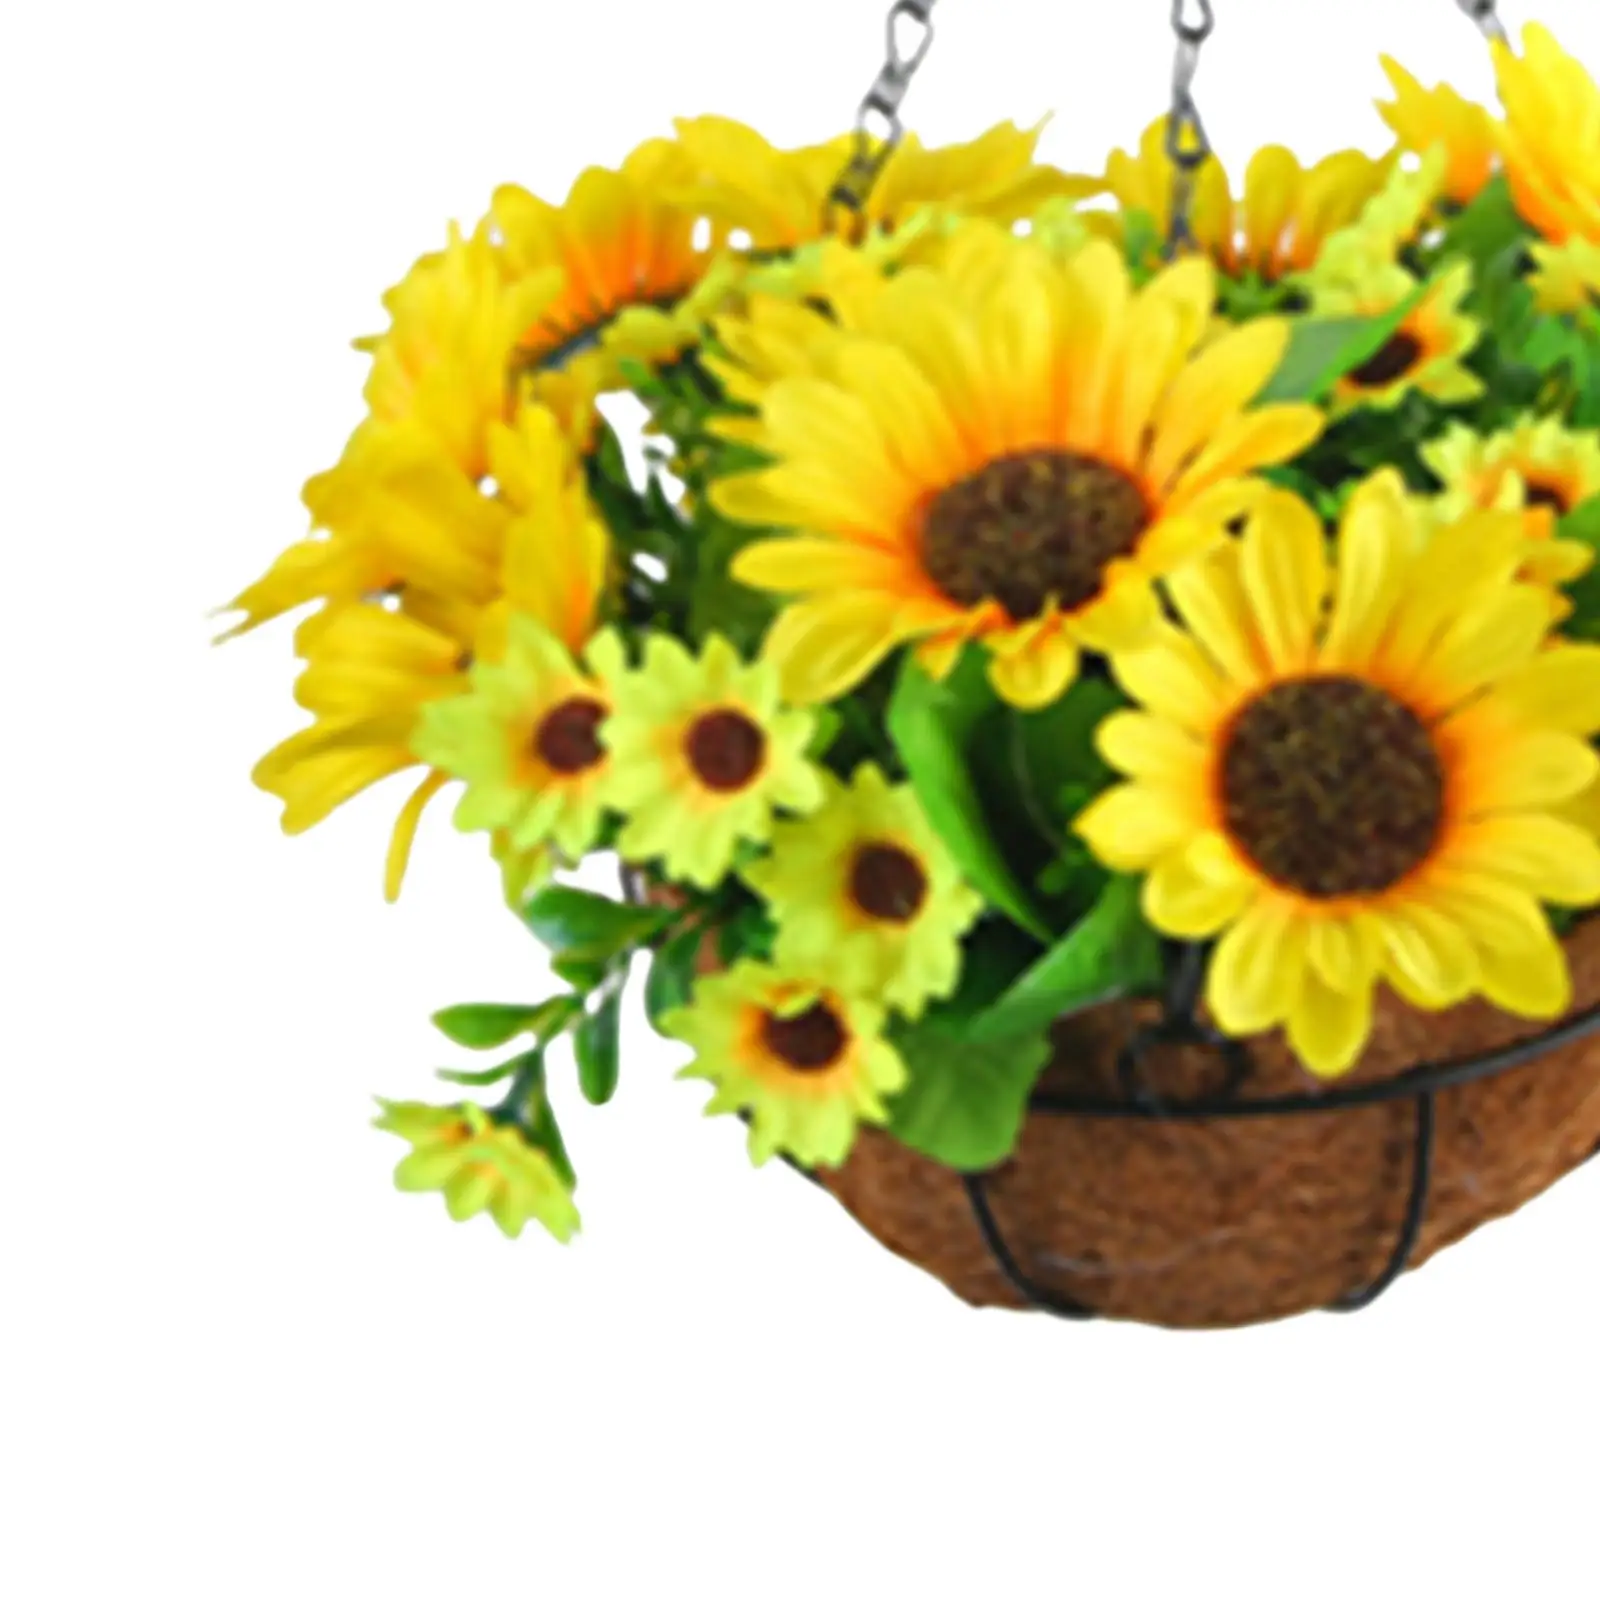 Artificial Hanging Basket Flowers Wreath Artificial Sunflower Bouquets for Home Bride Holding Flowers Tabletop Wedding Kitchen